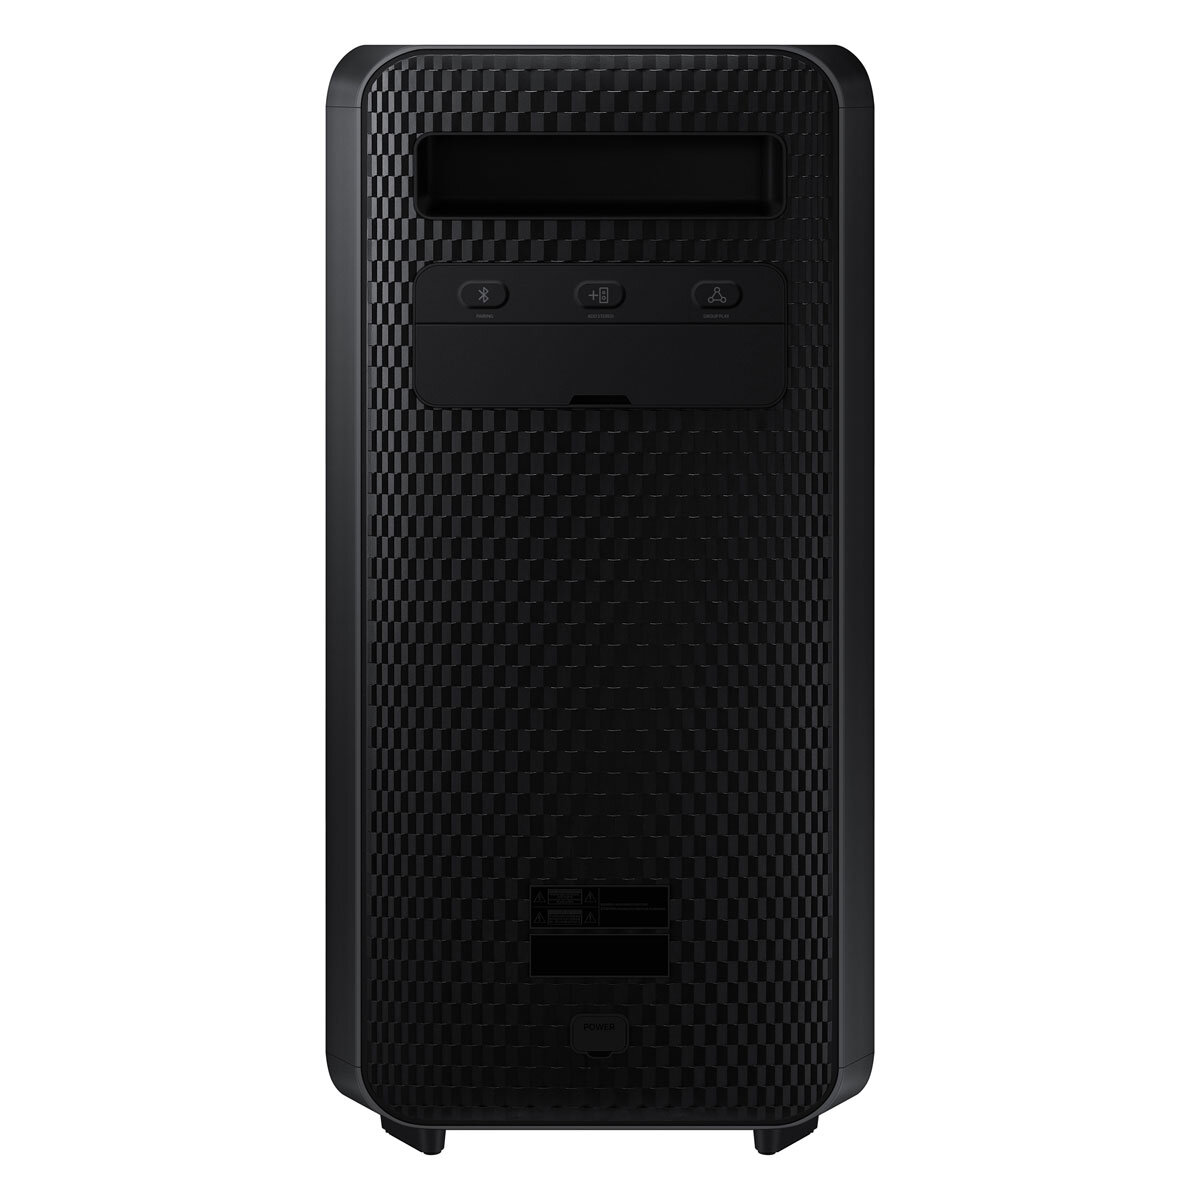 Buy Samsung MX-ST50/XU 240W IPX5 Sound Tower Bass Bass Booster Party Speaker at Costco.co.uk